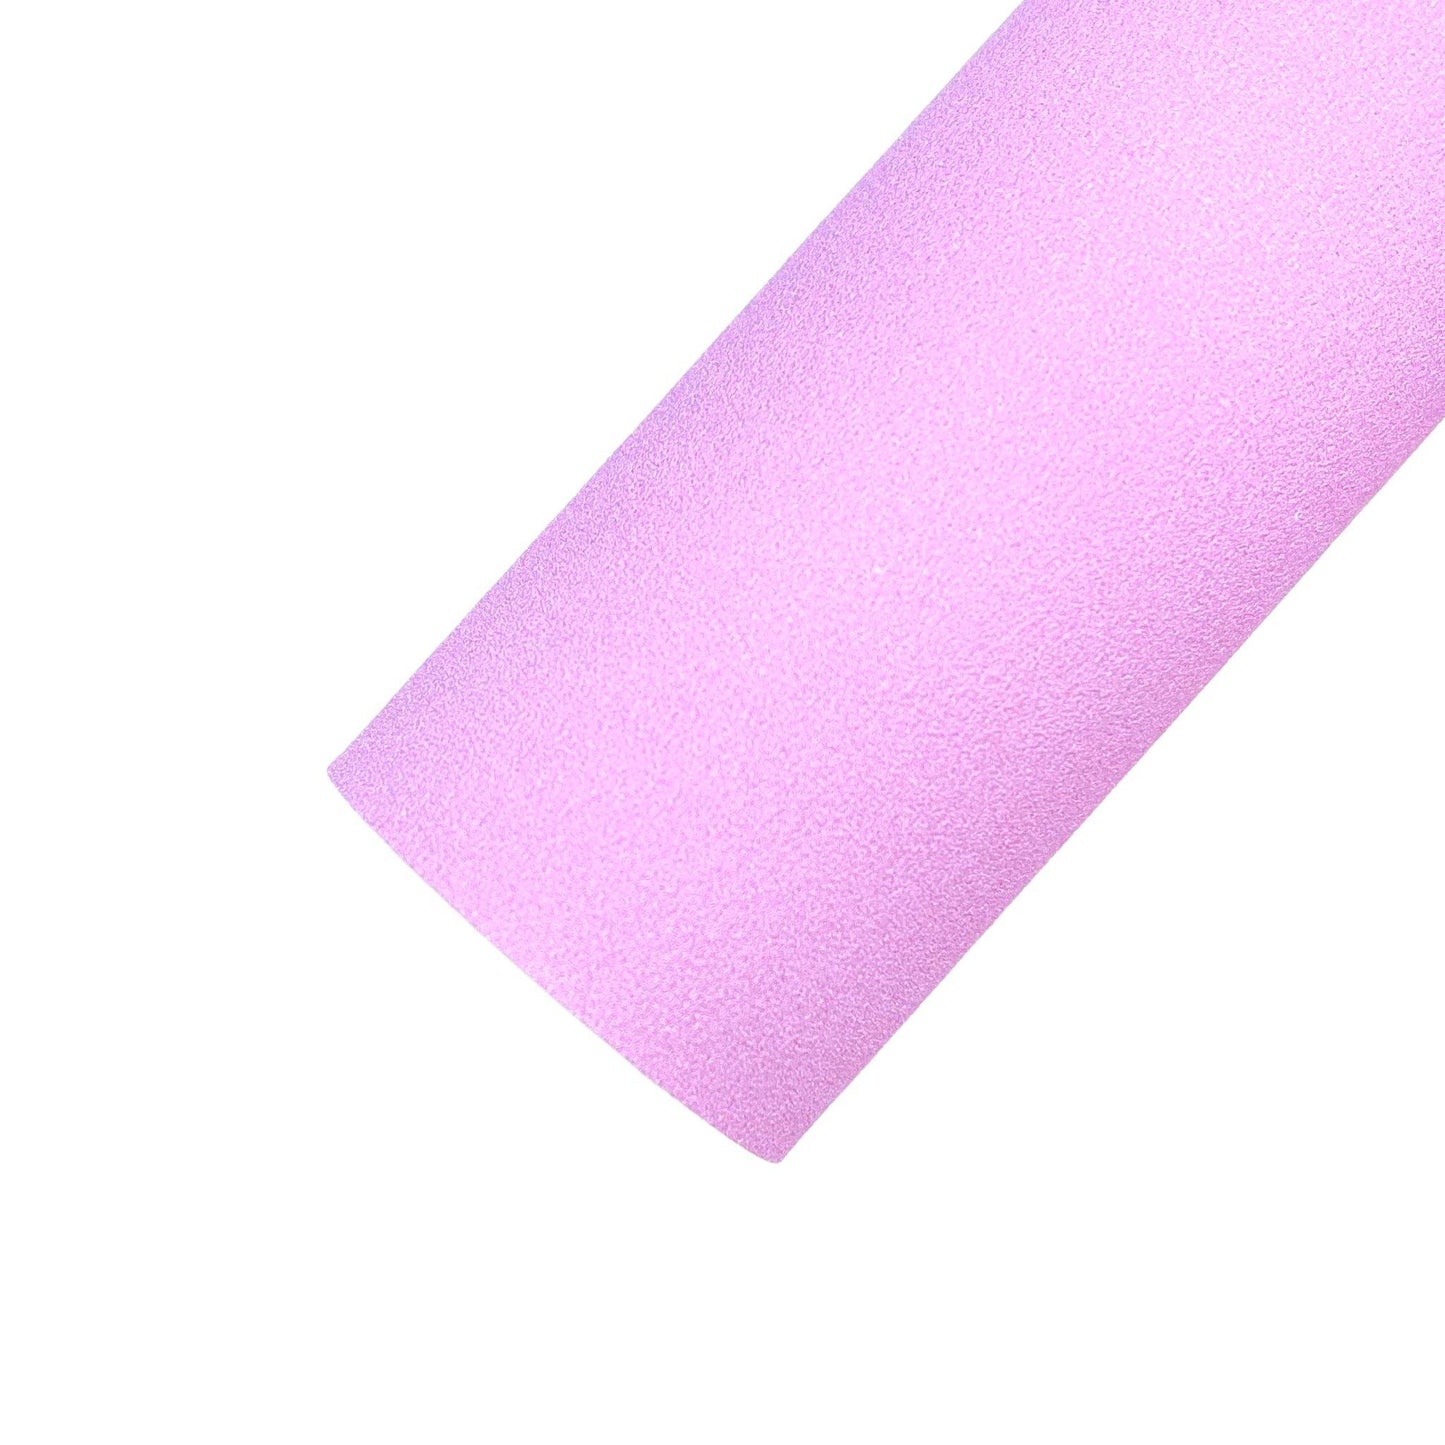 SMOOTH Faux Suede Fabric Sheets - Pretty in Pink Supply